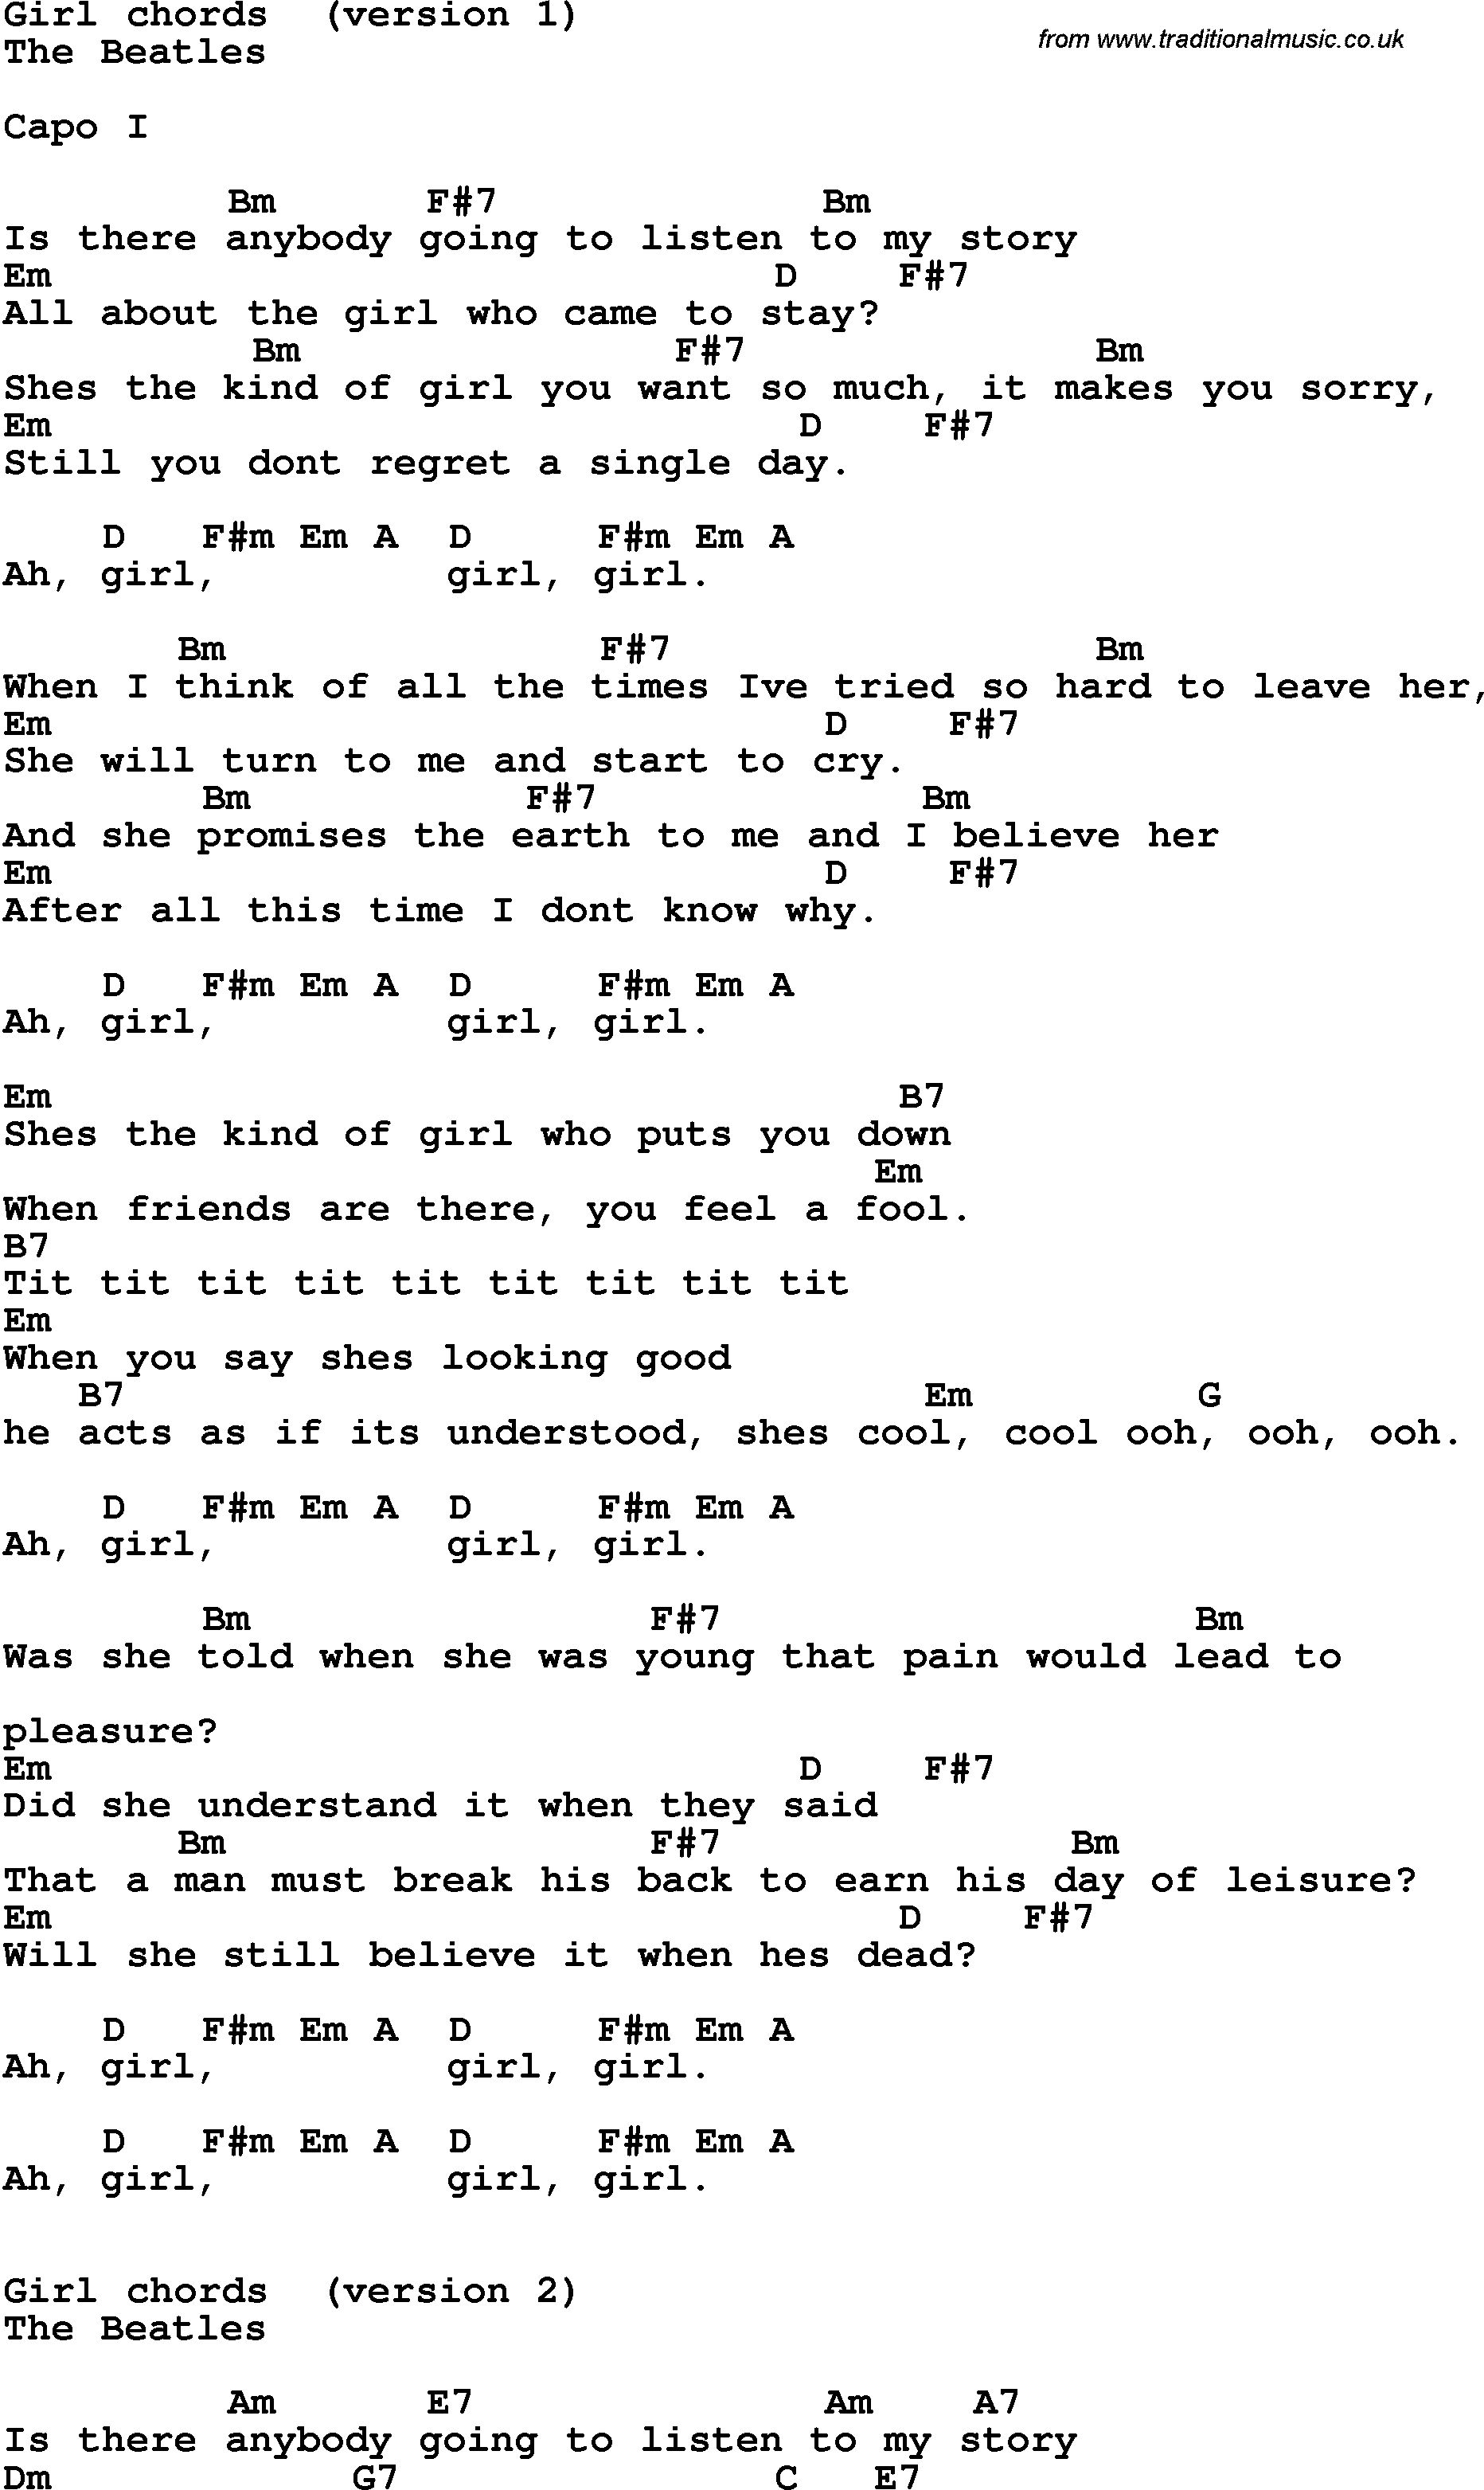 My Girl Chords Song Lyrics With Guitar Chords For Girl The Beatles